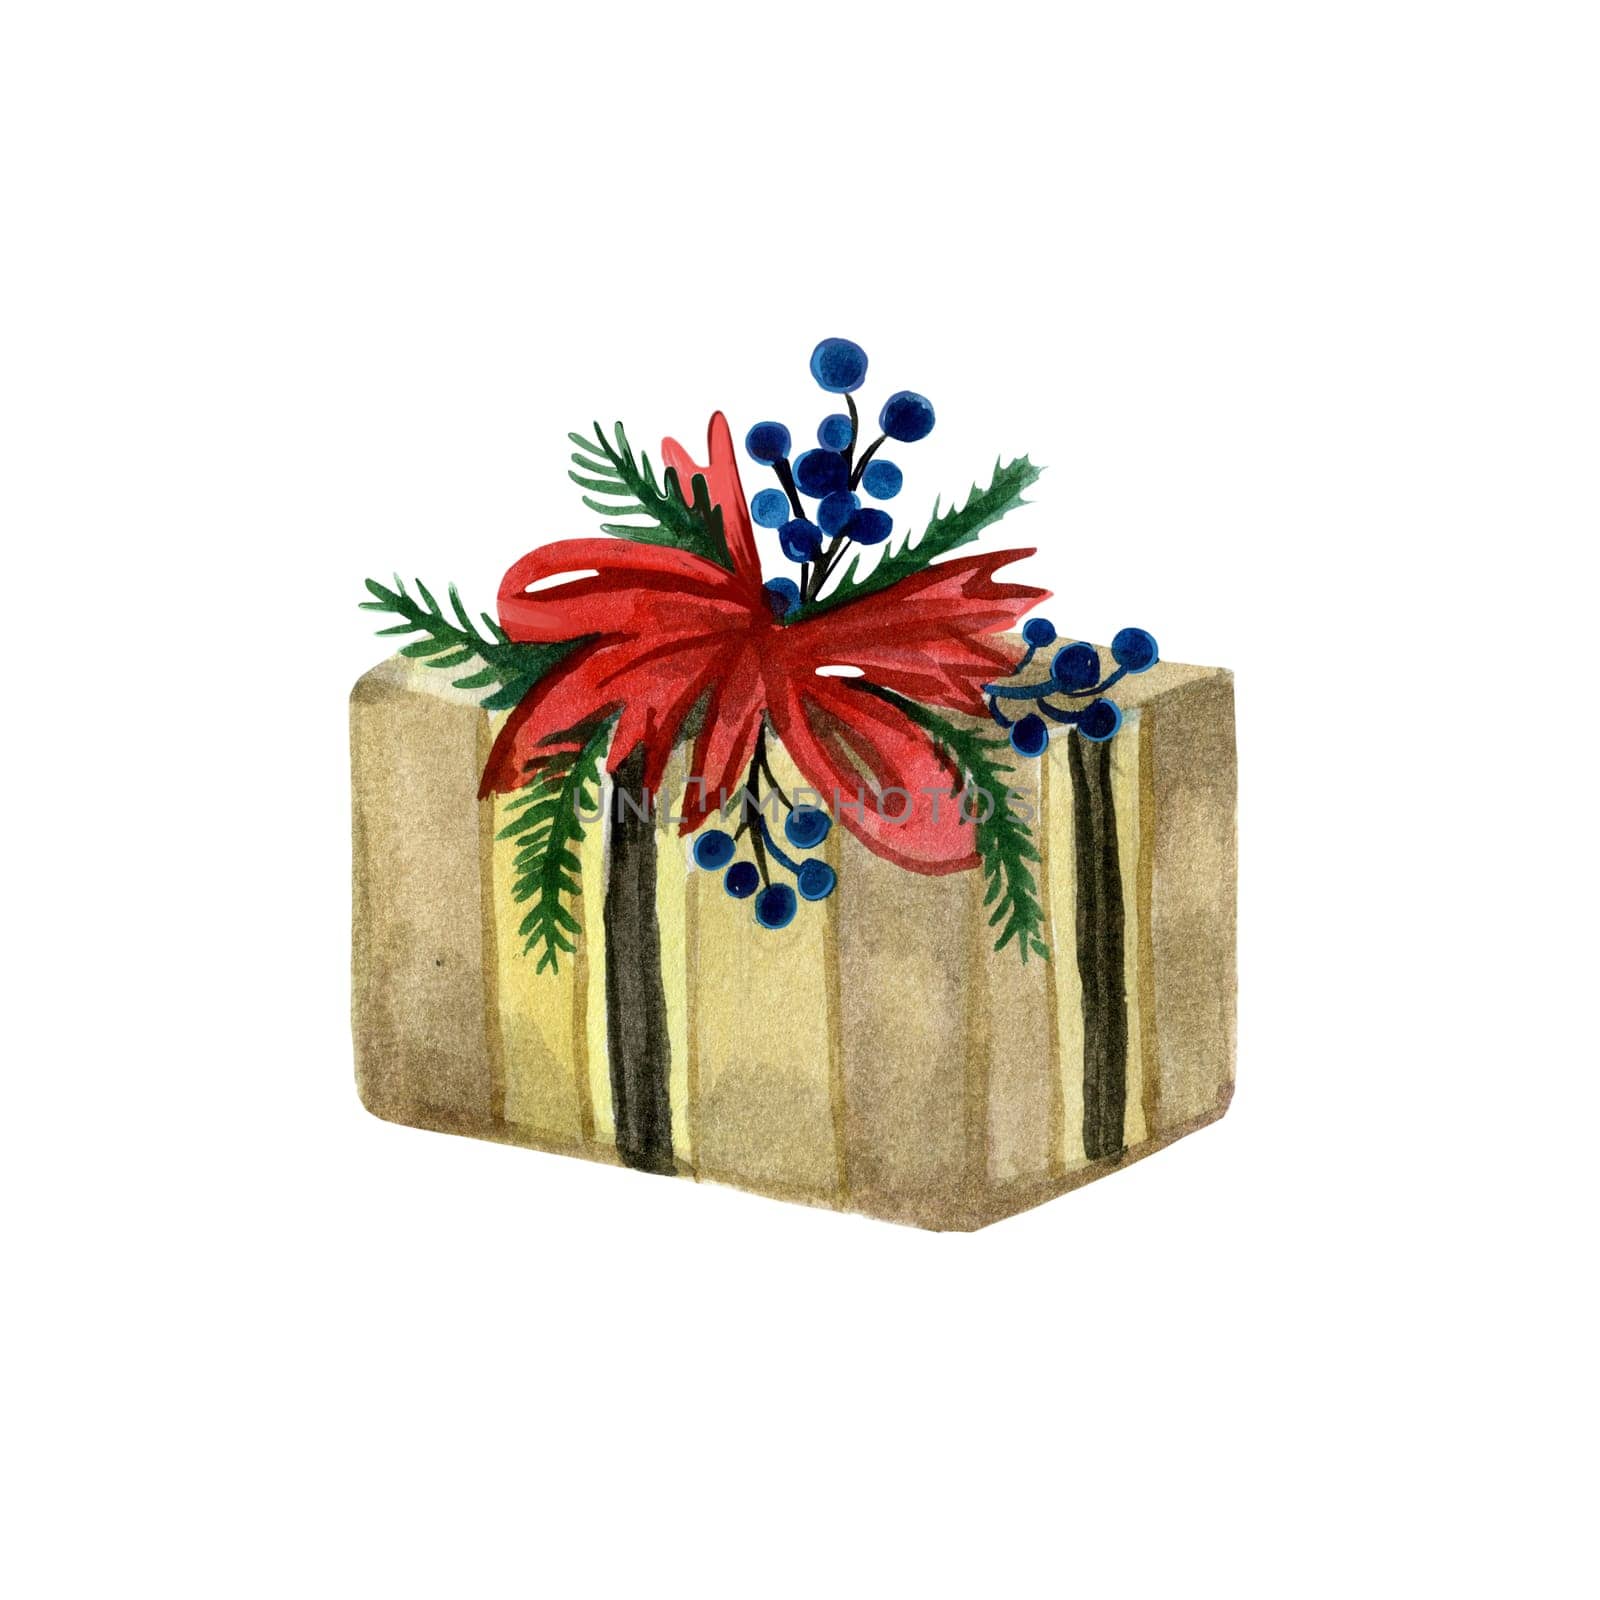 Hand drawn Christmas box wrapped in paper and decorated with branches and ribbons. Watercolor illustration